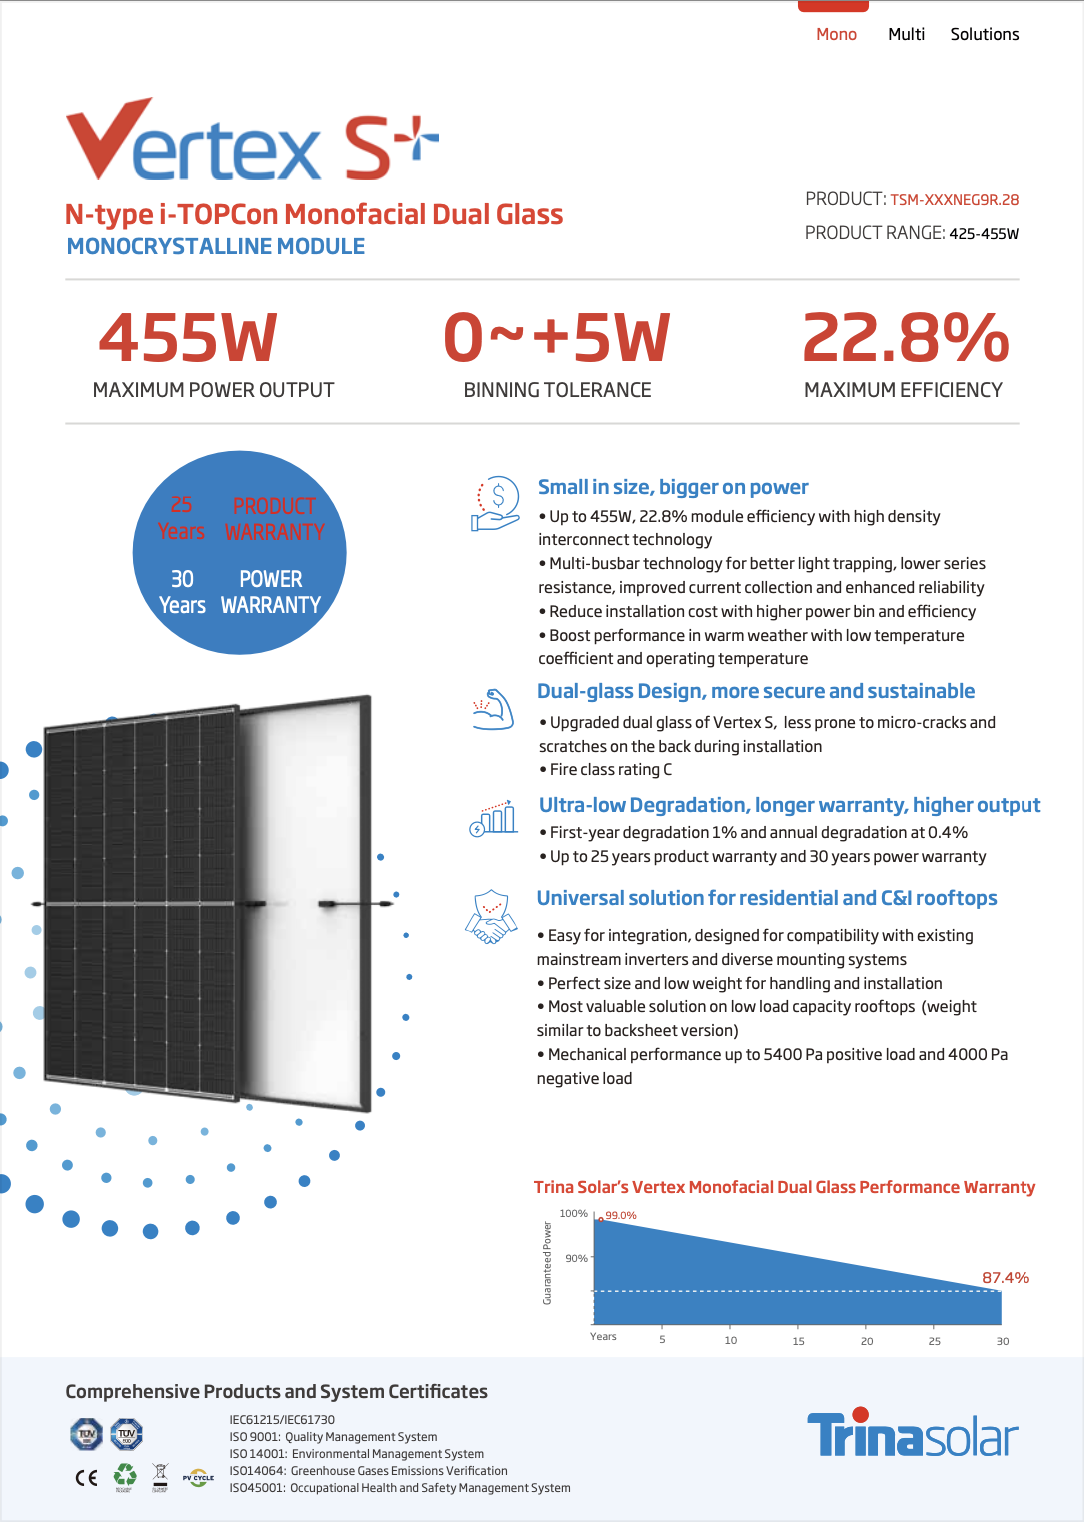 Trina Solar's Vertex S+ Monofacial Dual Glass Solar Panel Datasheet showcasing the 455W N-type module with a 22.8% maximum efficiency, including details on size, power output, warranty, and certifications.